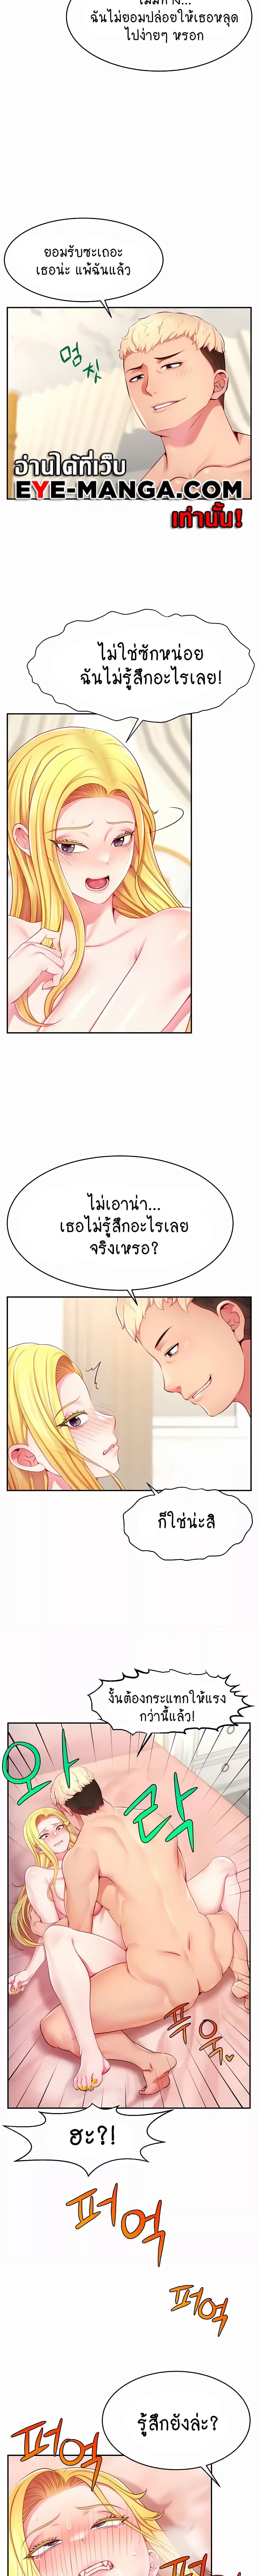 Making Friends With Streamers by Hacking! ตอนที่ 5 ภาพ 9